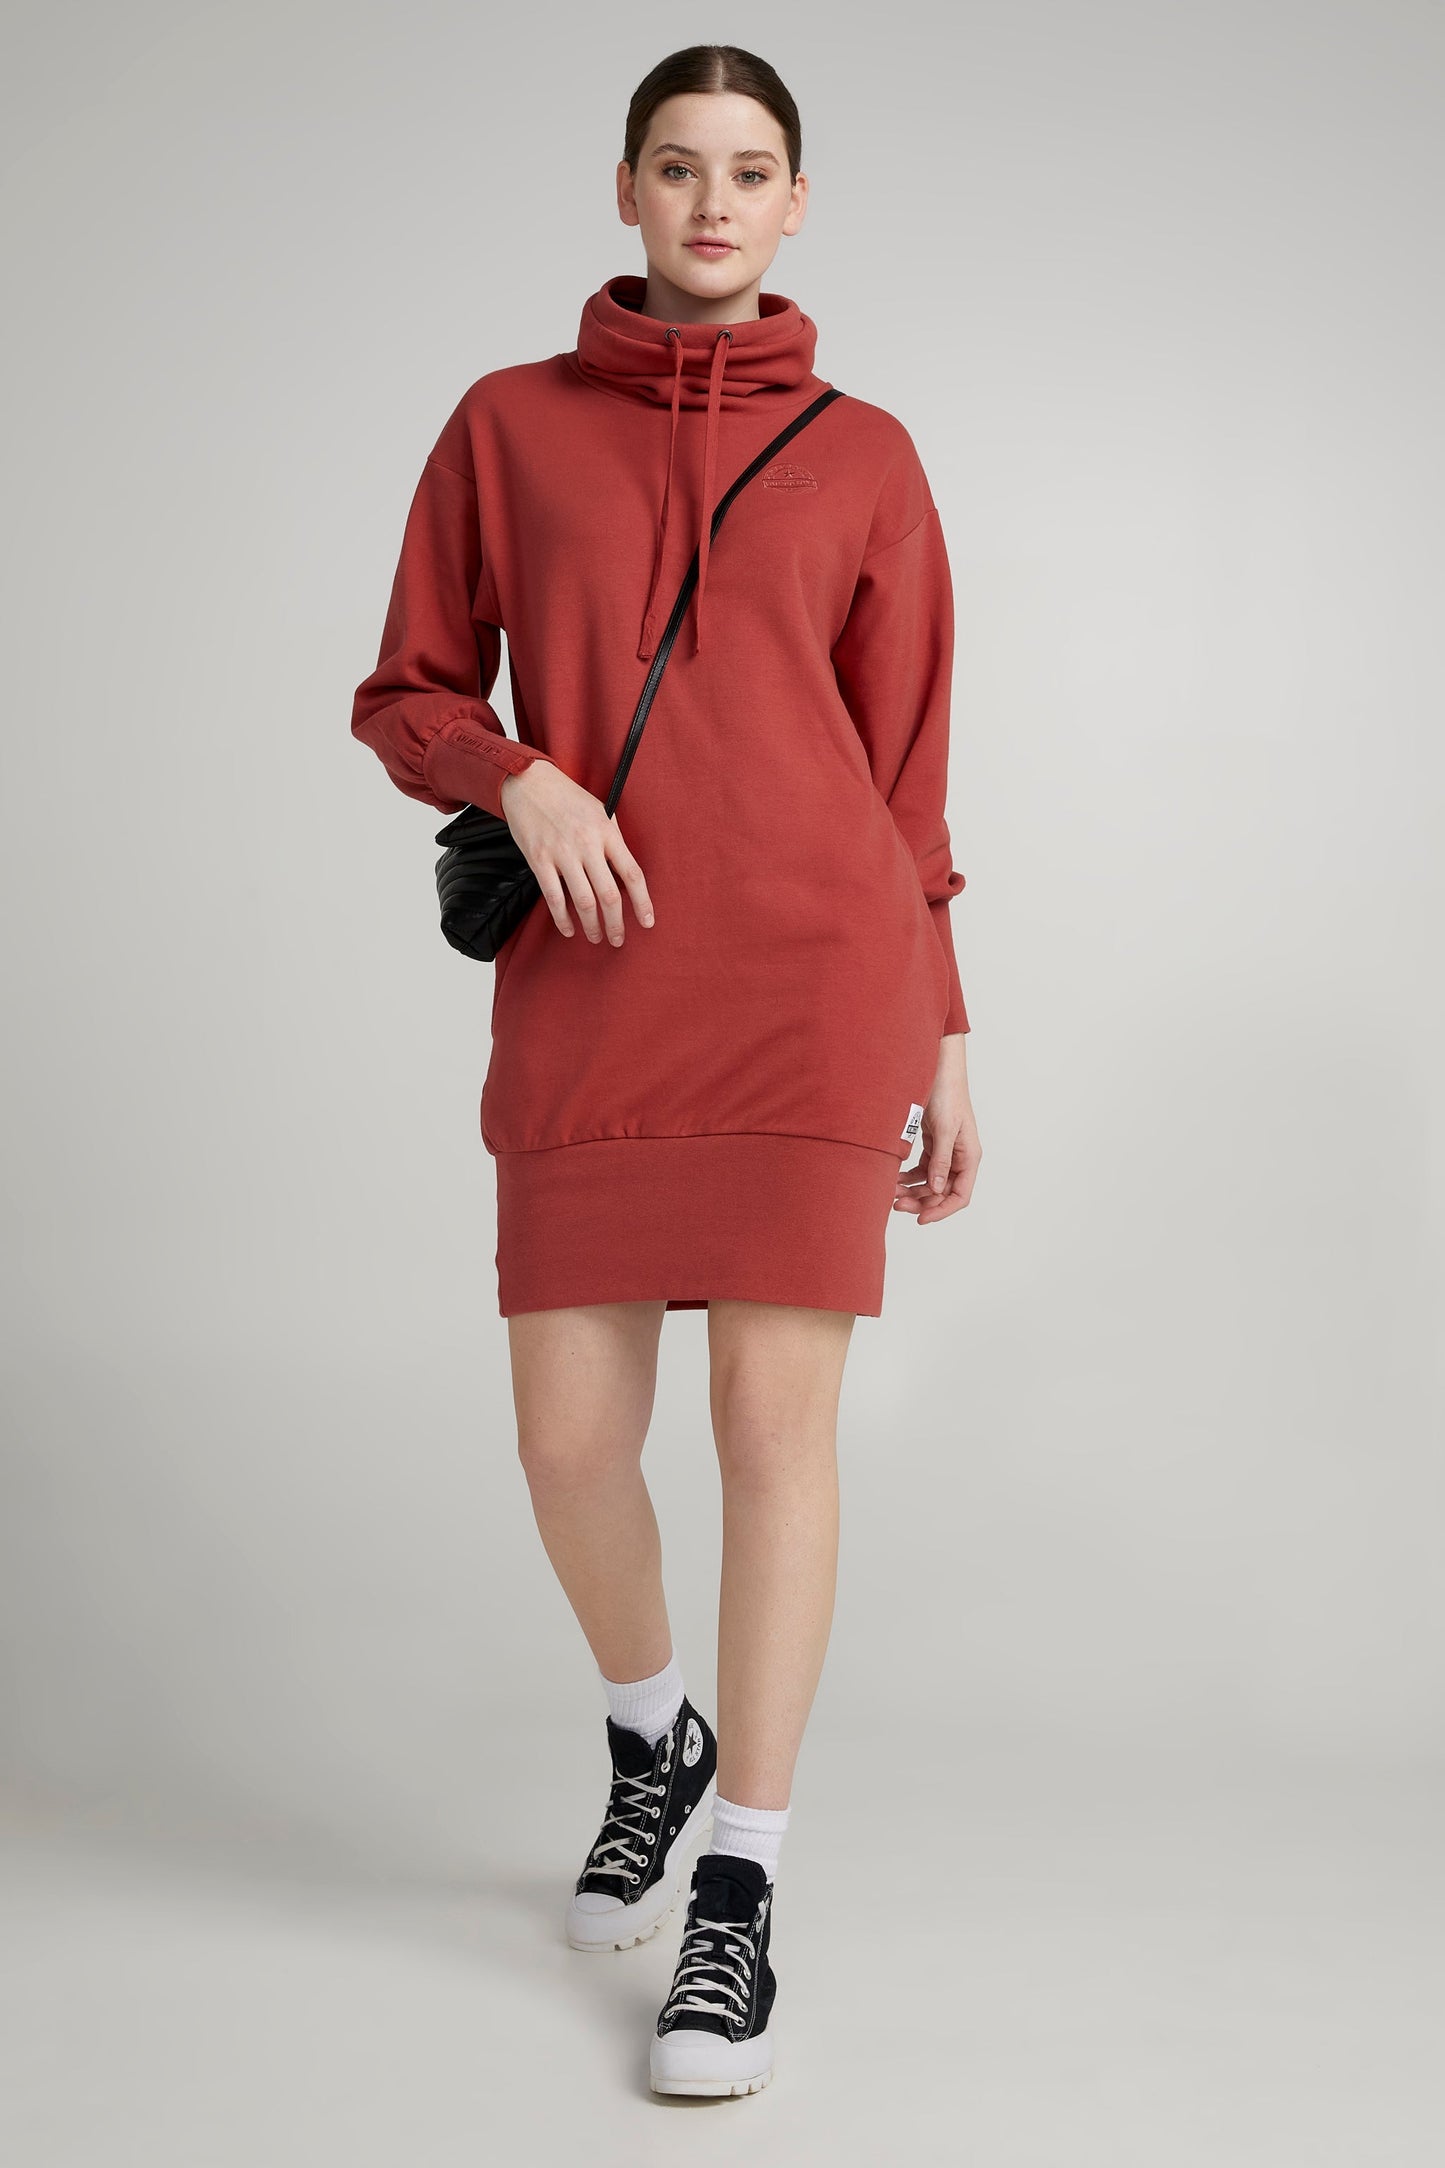 Cotton hooded dress with high neck